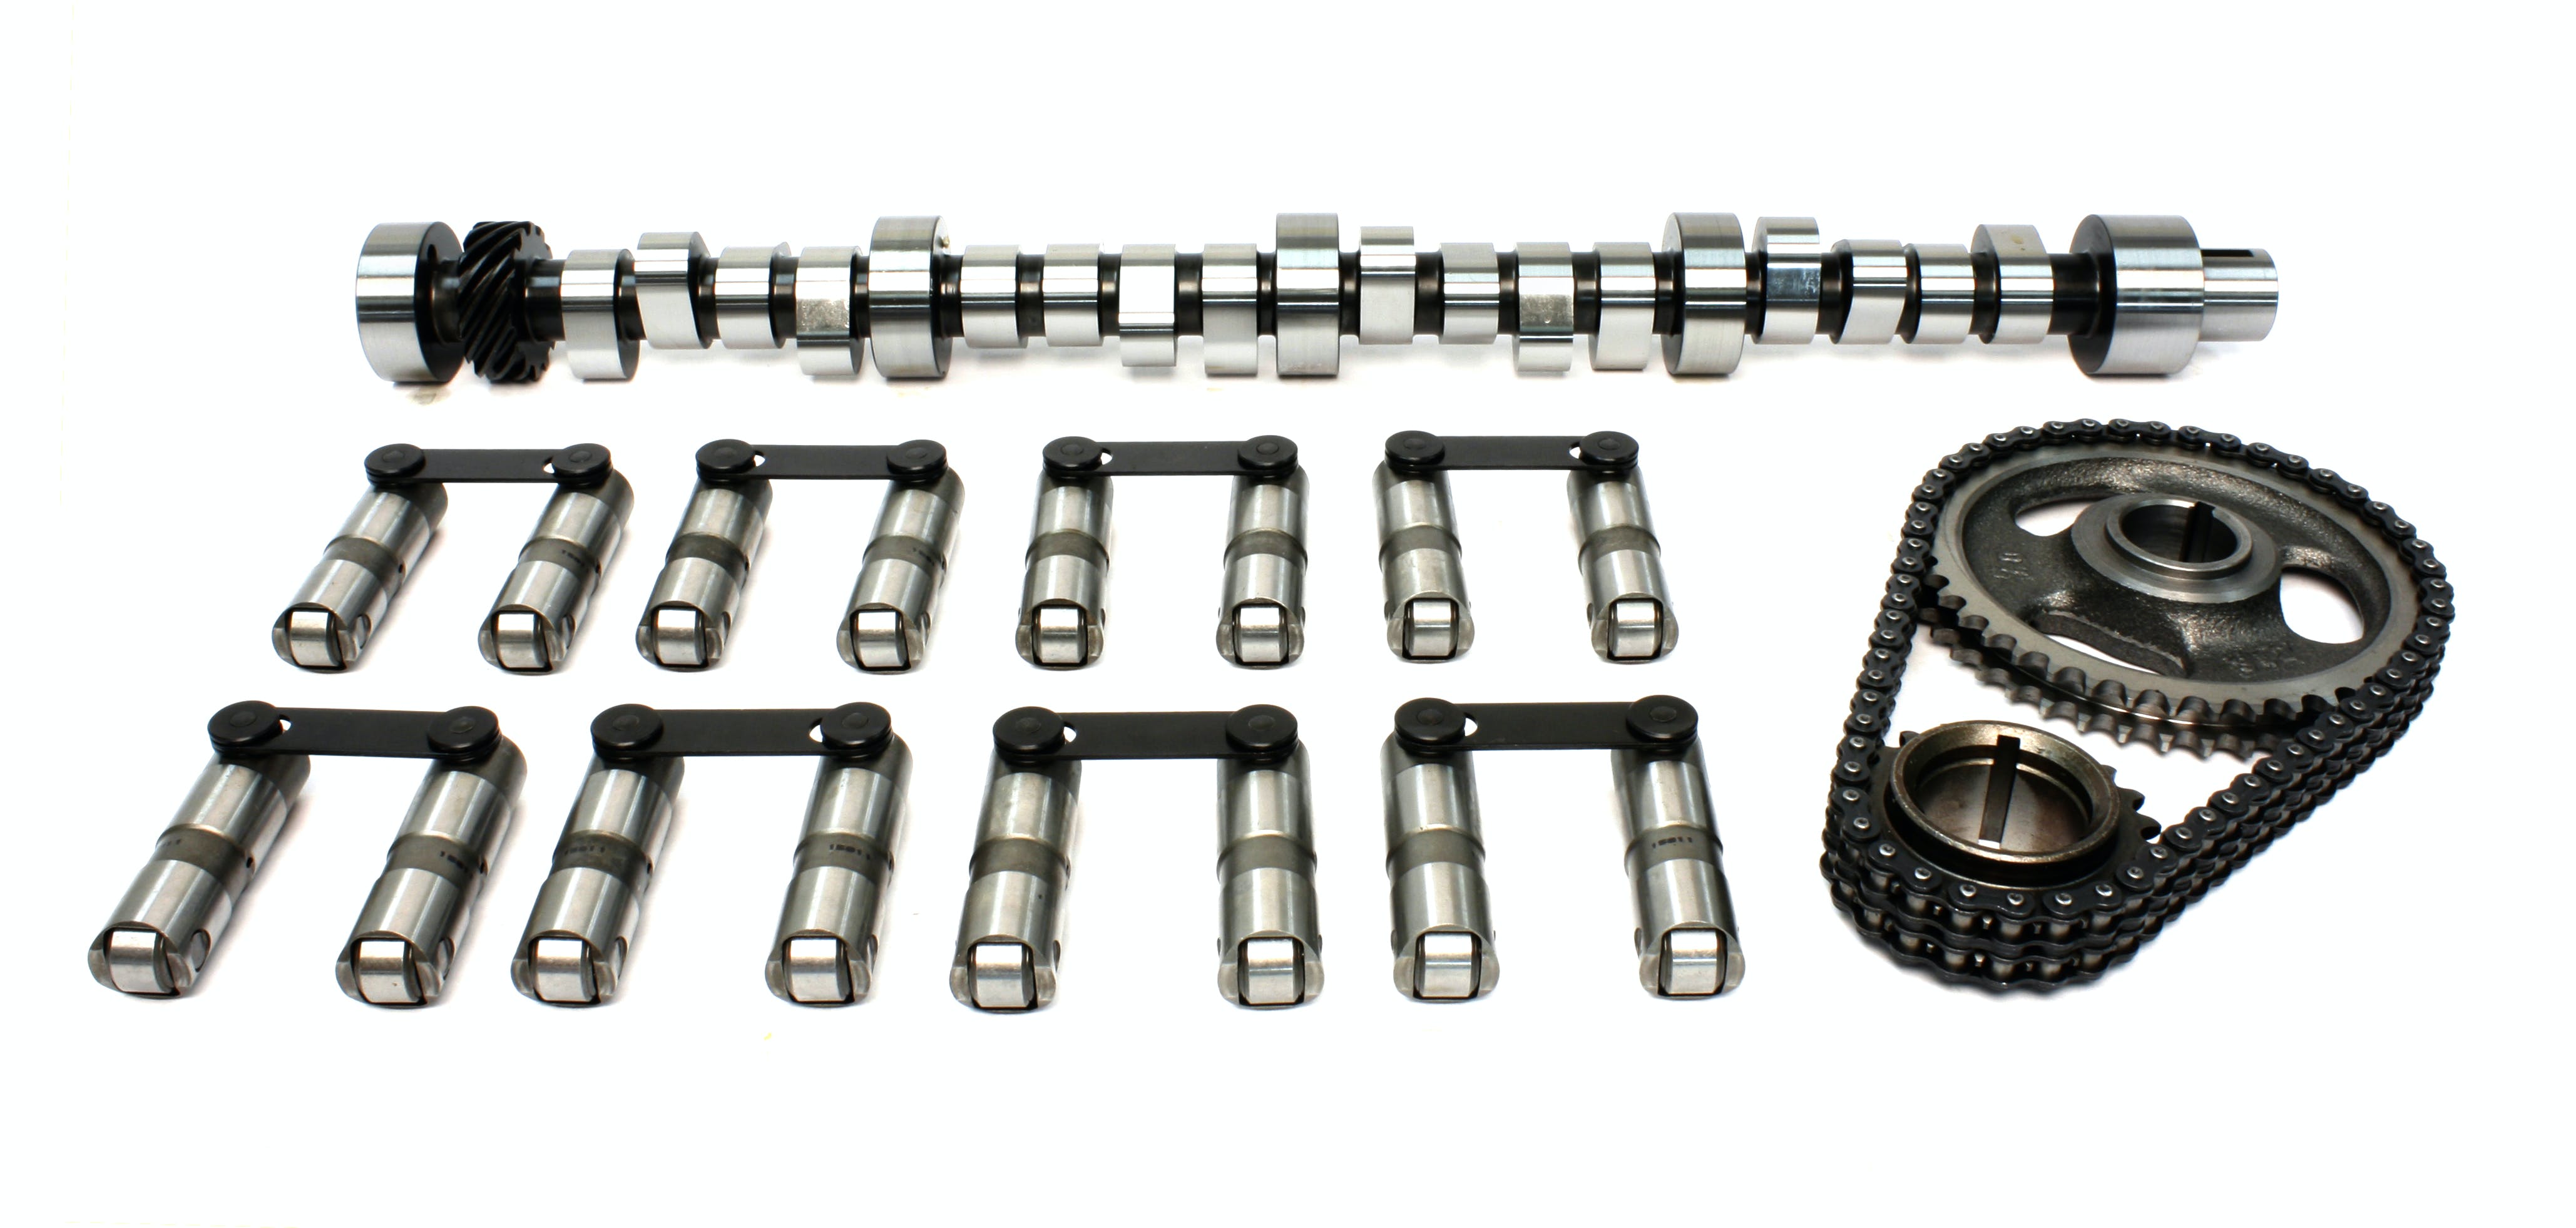 Competition Cams SK51-433-11 Xtreme Energy 236/242 Hydraulic Roller SK-Kit for Pontiac 265-455